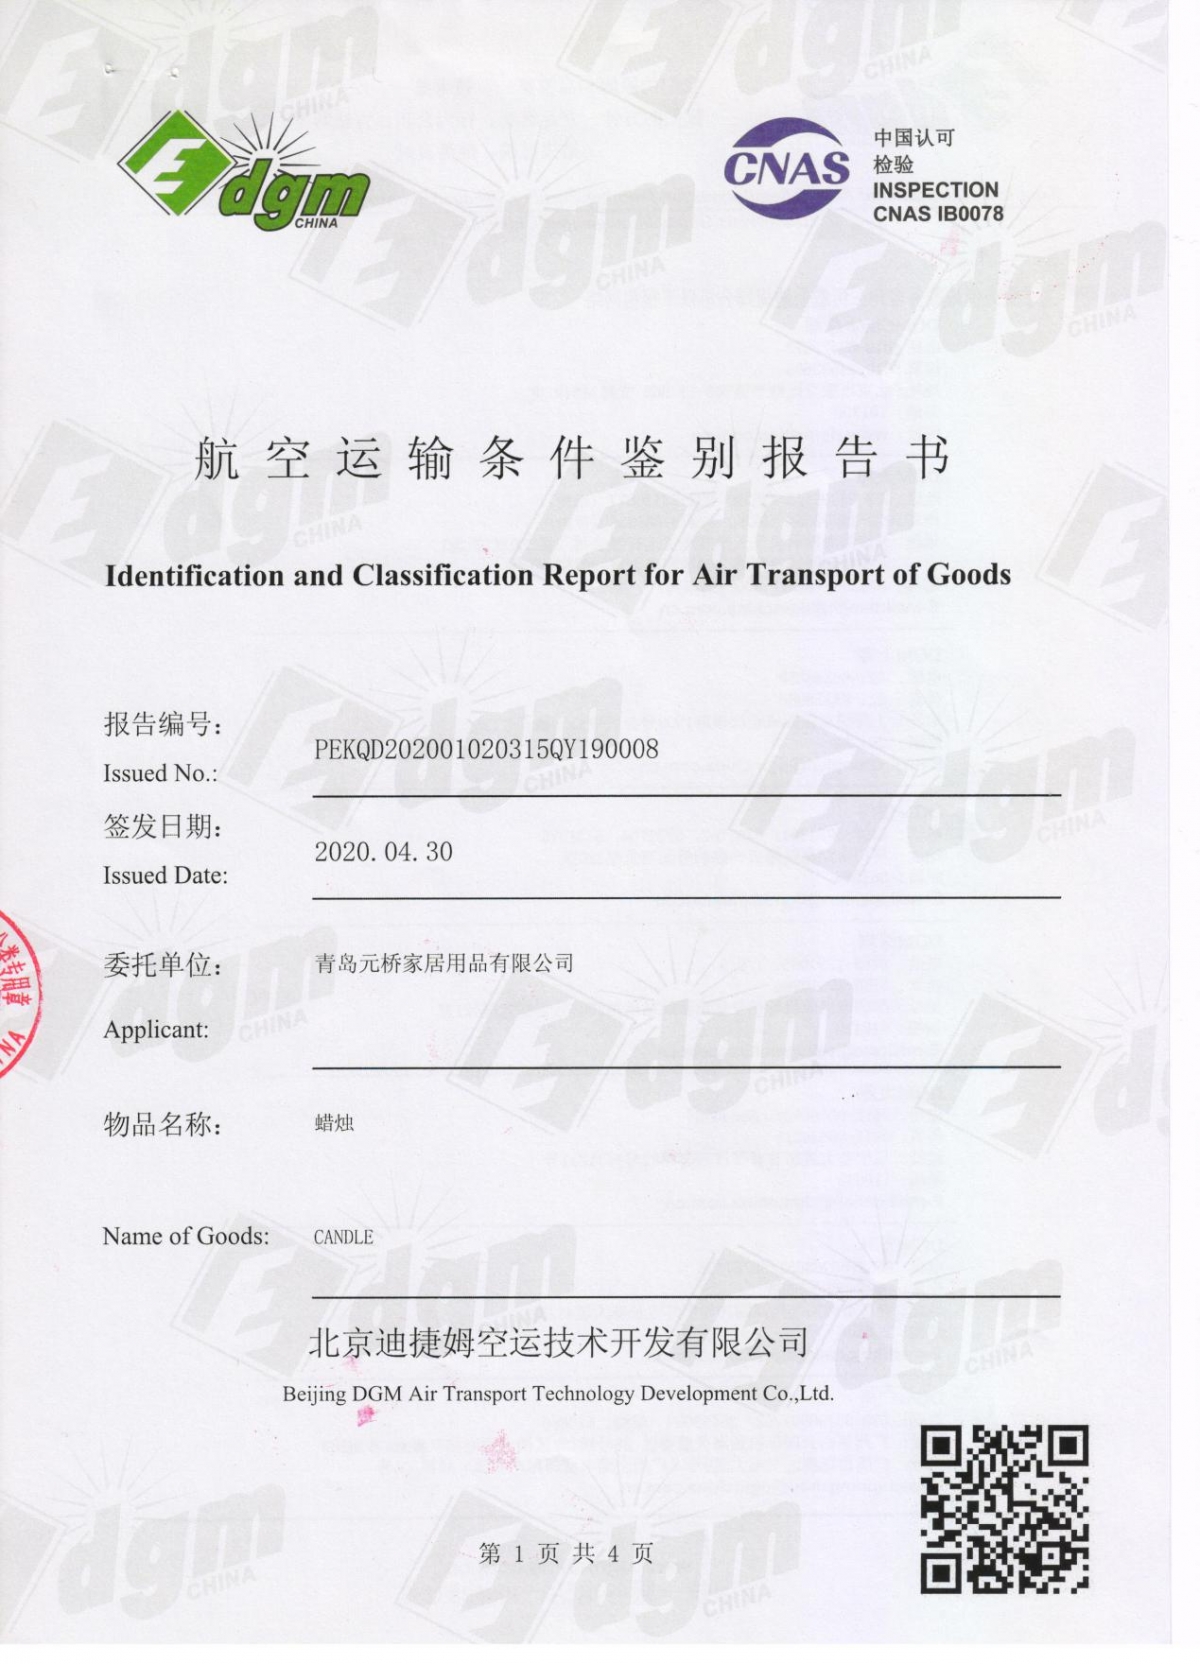 DGM Cargo Air Transport Identification And Classification Report ，Use For Send Scented Candles Samples From China Factory To Foreign Customers By Air Transport ,Test Report-HOWCANDLE-Candles,Scented Candles,Aromatherapy Candles,Soy Candles,Vegan Candles,Jar Candles,Pillar Candles,Candle Gift Sets,Essential Oils,Reed Diffuser,Candle Holder,